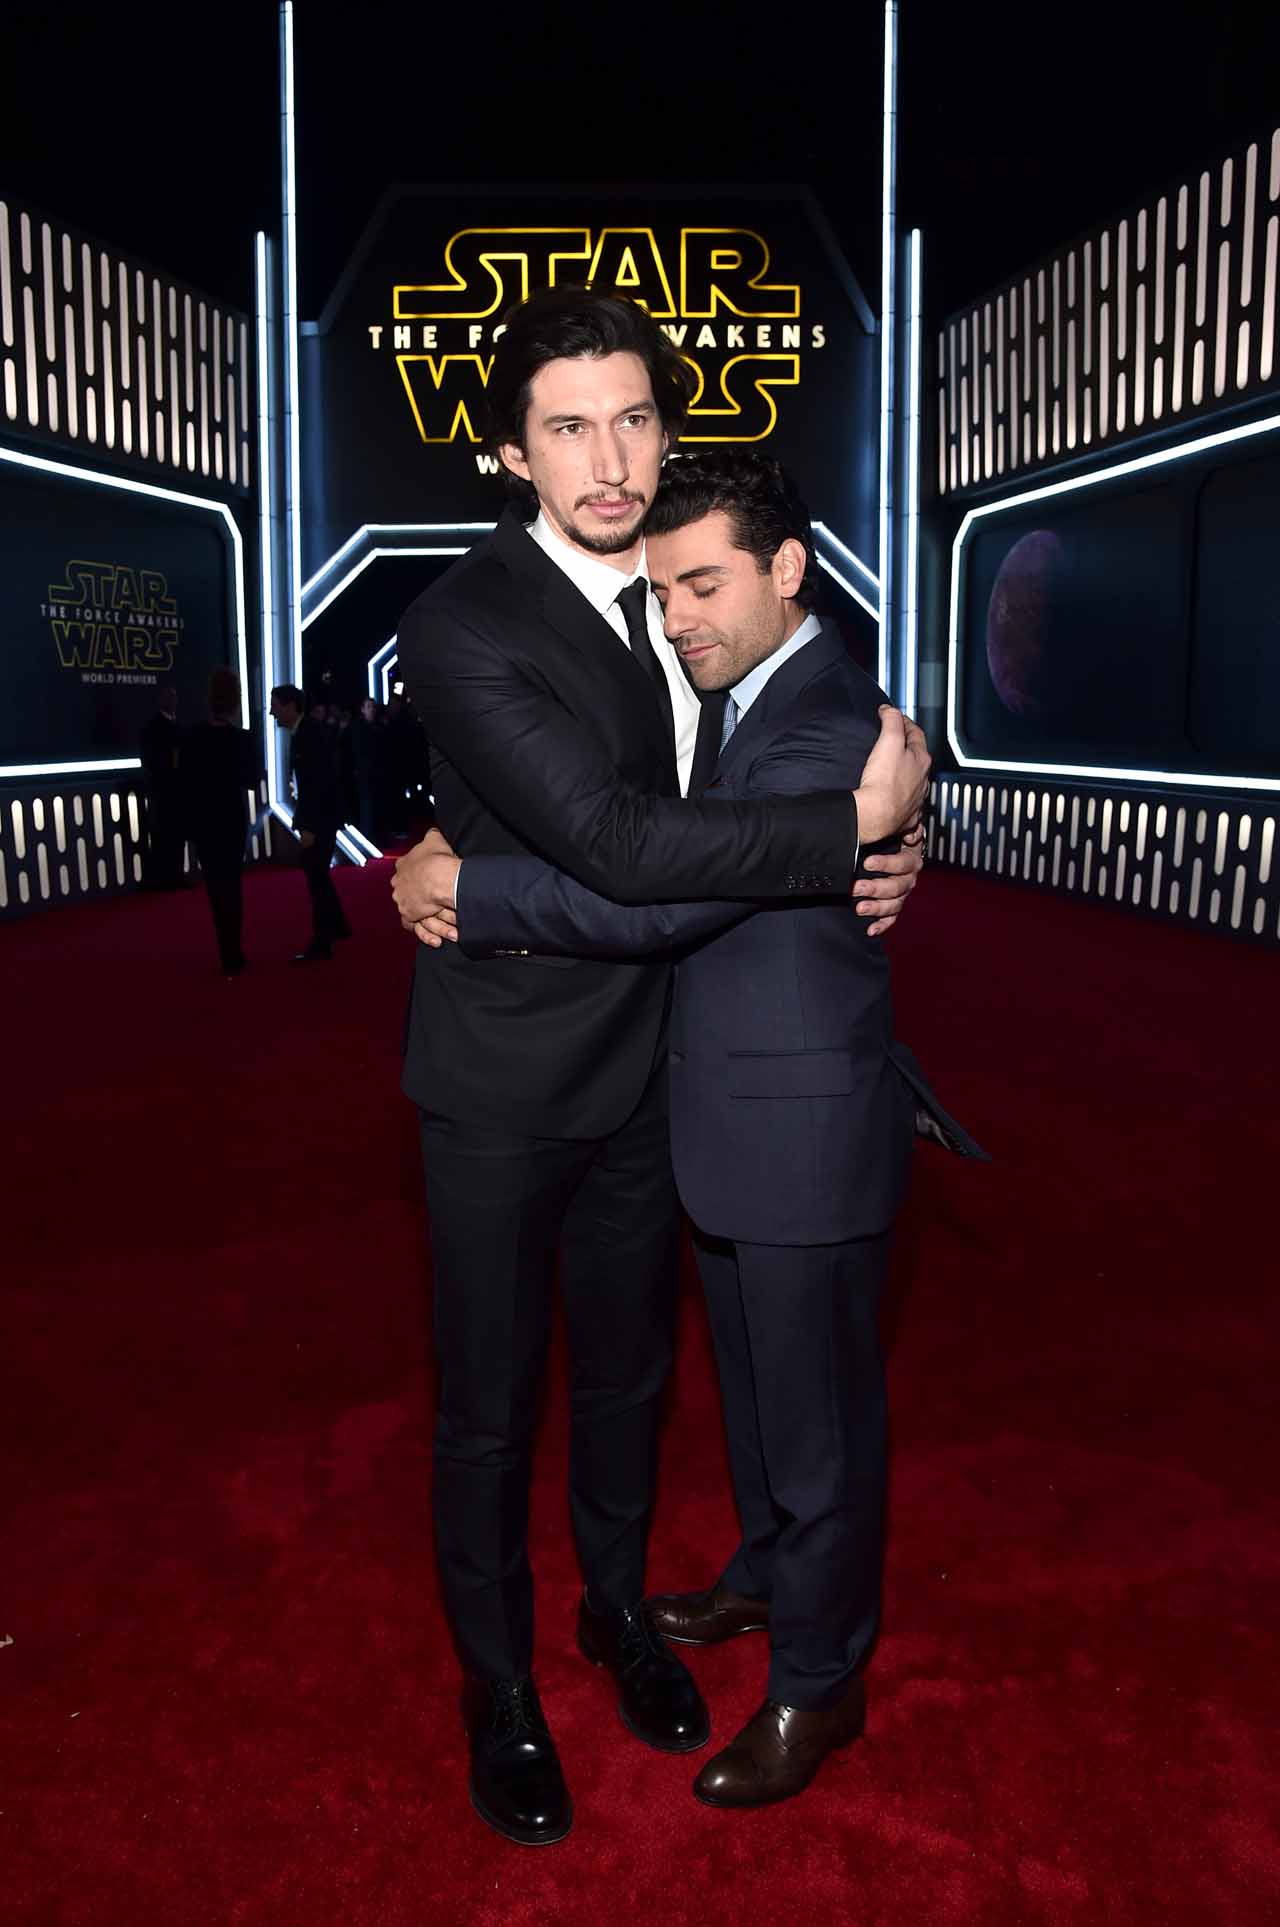 HOLLYWOOD, CA - DECEMBER 14:  Actors Adam Driver (L) and Oscar Isaac attend the World Premiere of ?Star Wars: The Force Awakens? at the Dolby, El Capitan, and TCL Theatres on December 14, 2015 in Hollywood, California.  (Photo by Alberto E. Rodriguez/Getty Images for Disney) *** Local Caption *** Adam Driver;Oscar Isaac